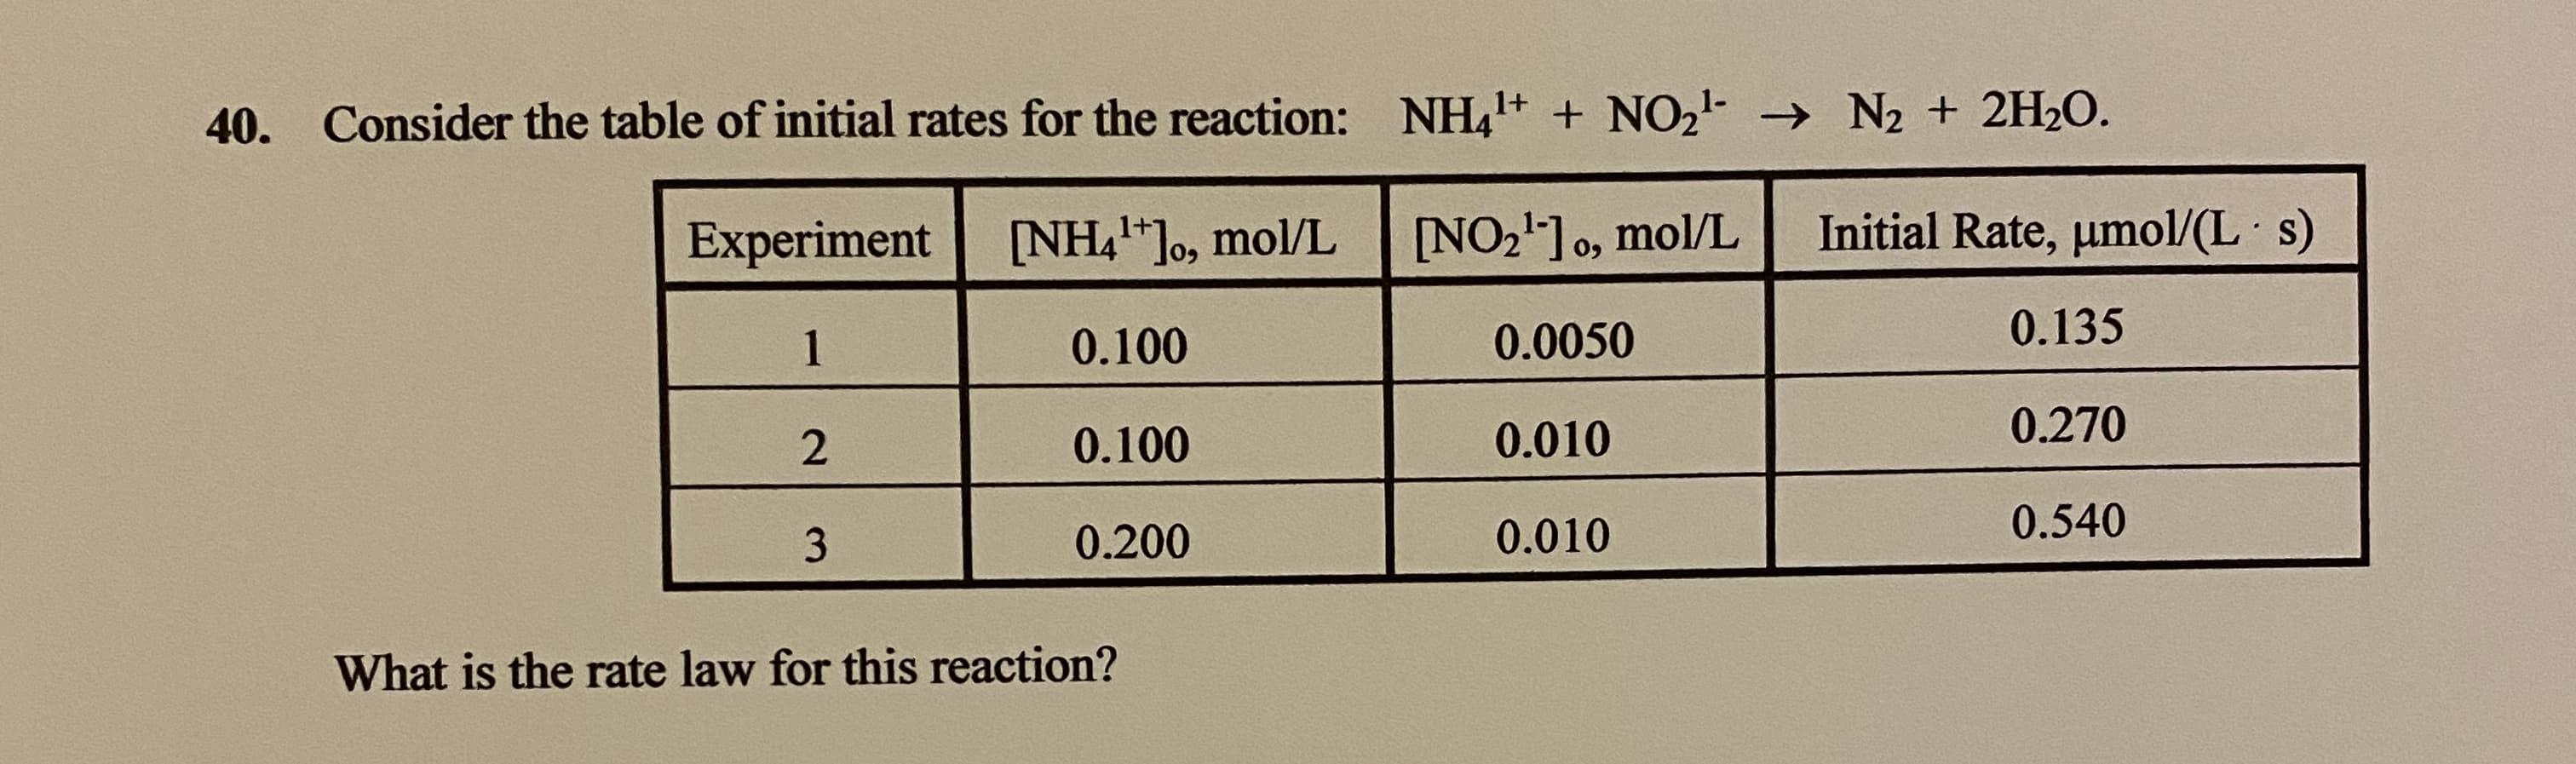 Consider the table of initial rates for the reaction: NH,+ + NO2 → N2 + 2H2O.
Experiment
[NH,"]o, mol/L
[NO2']0, mol/L
Initial Rate, umol/(L s)
1
0.100
0.0050
0.135
0.100
0.010
0.270
0.200
0.010
0.540
What is the rate law for this reaction?
